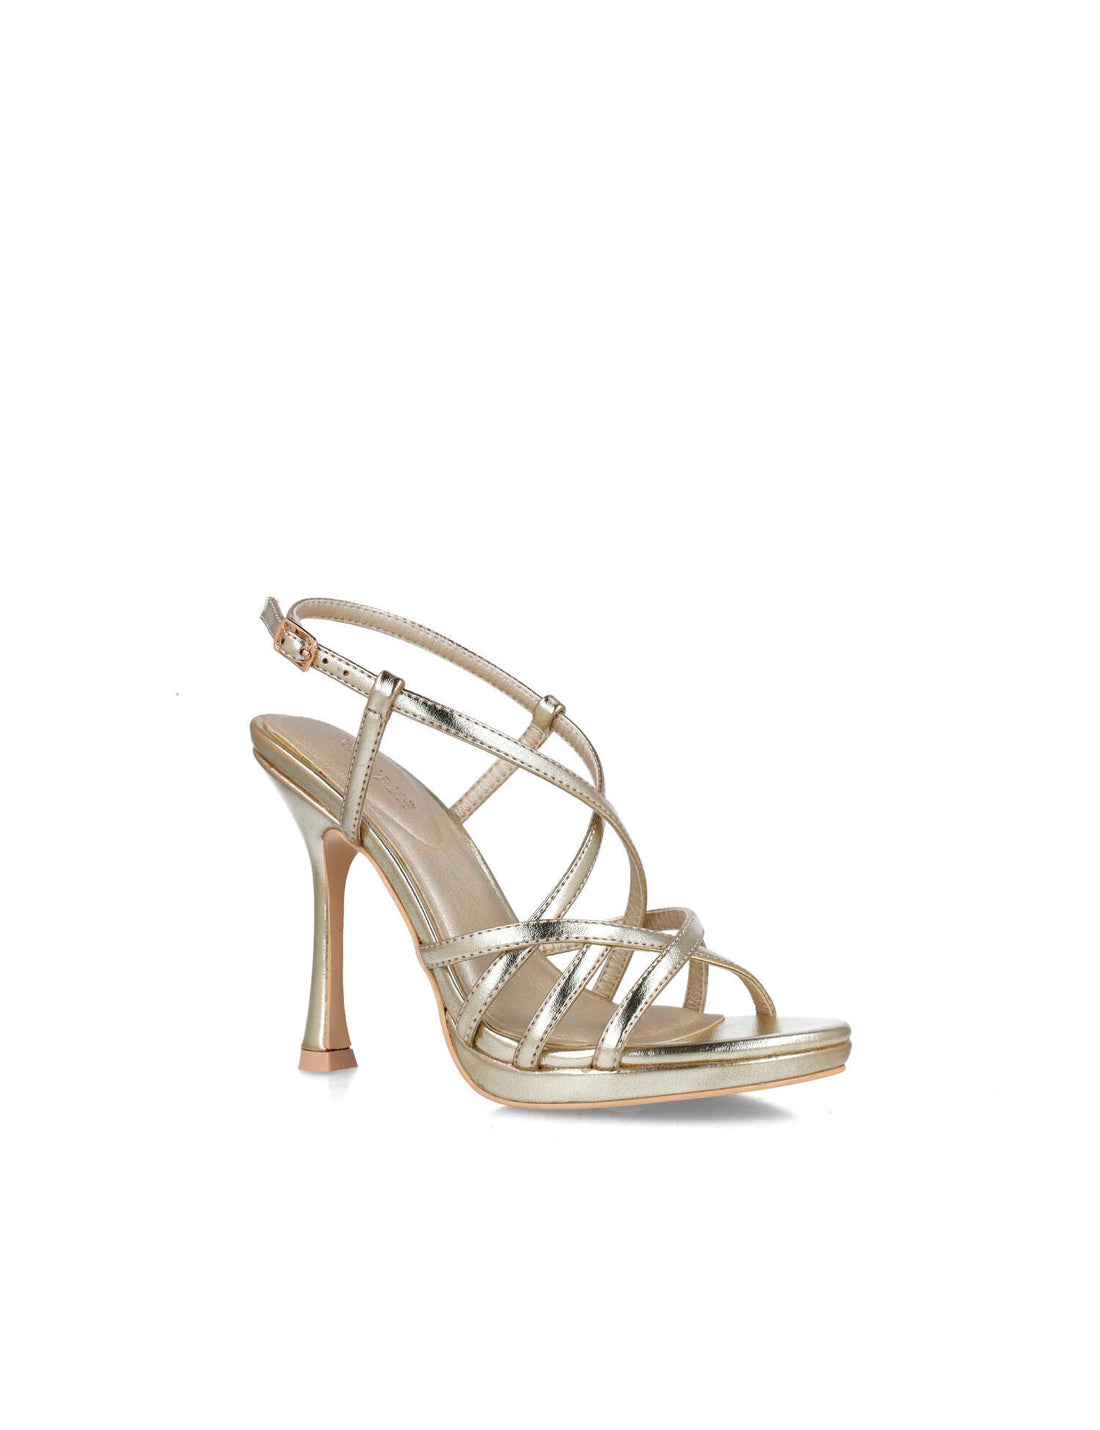 Gold High-Heel Sandals With Slingback Strap_24990_00_02